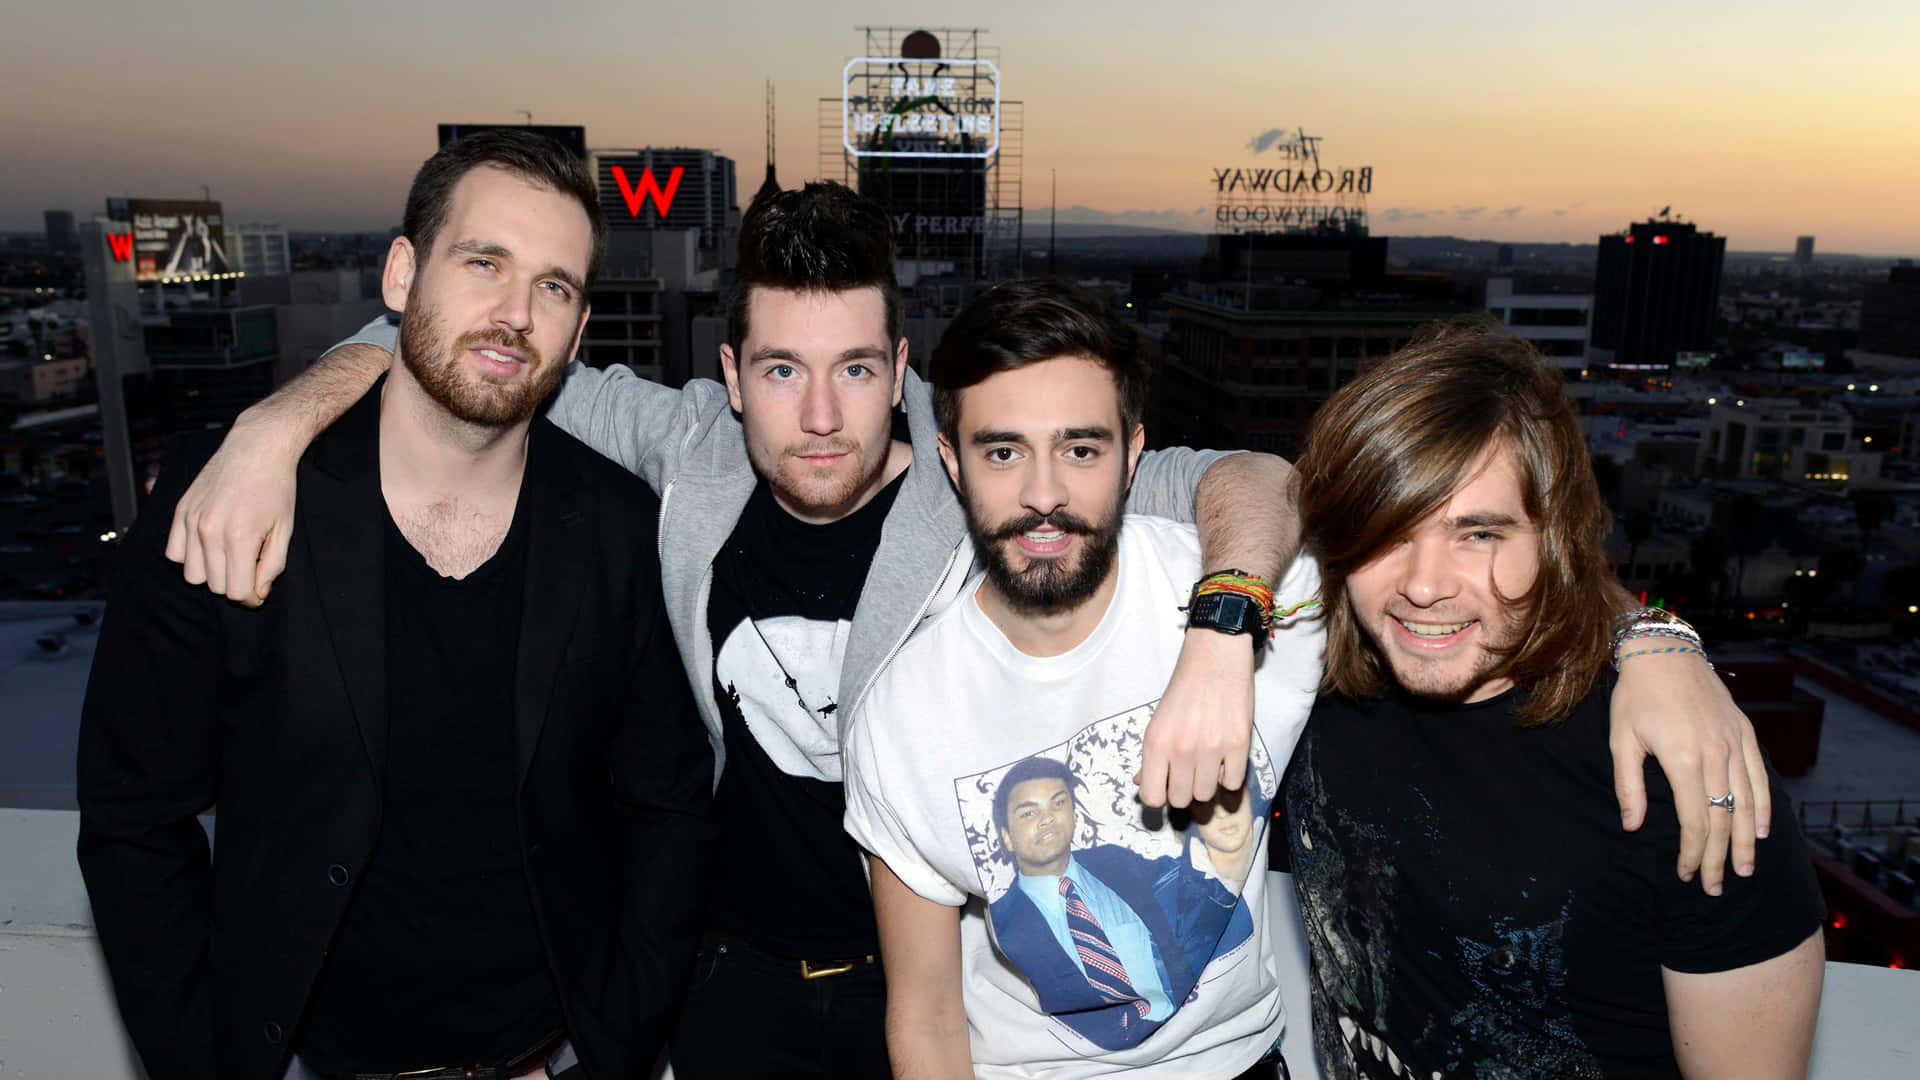 Enjoy the energy of Bastille inspired by their latest release.